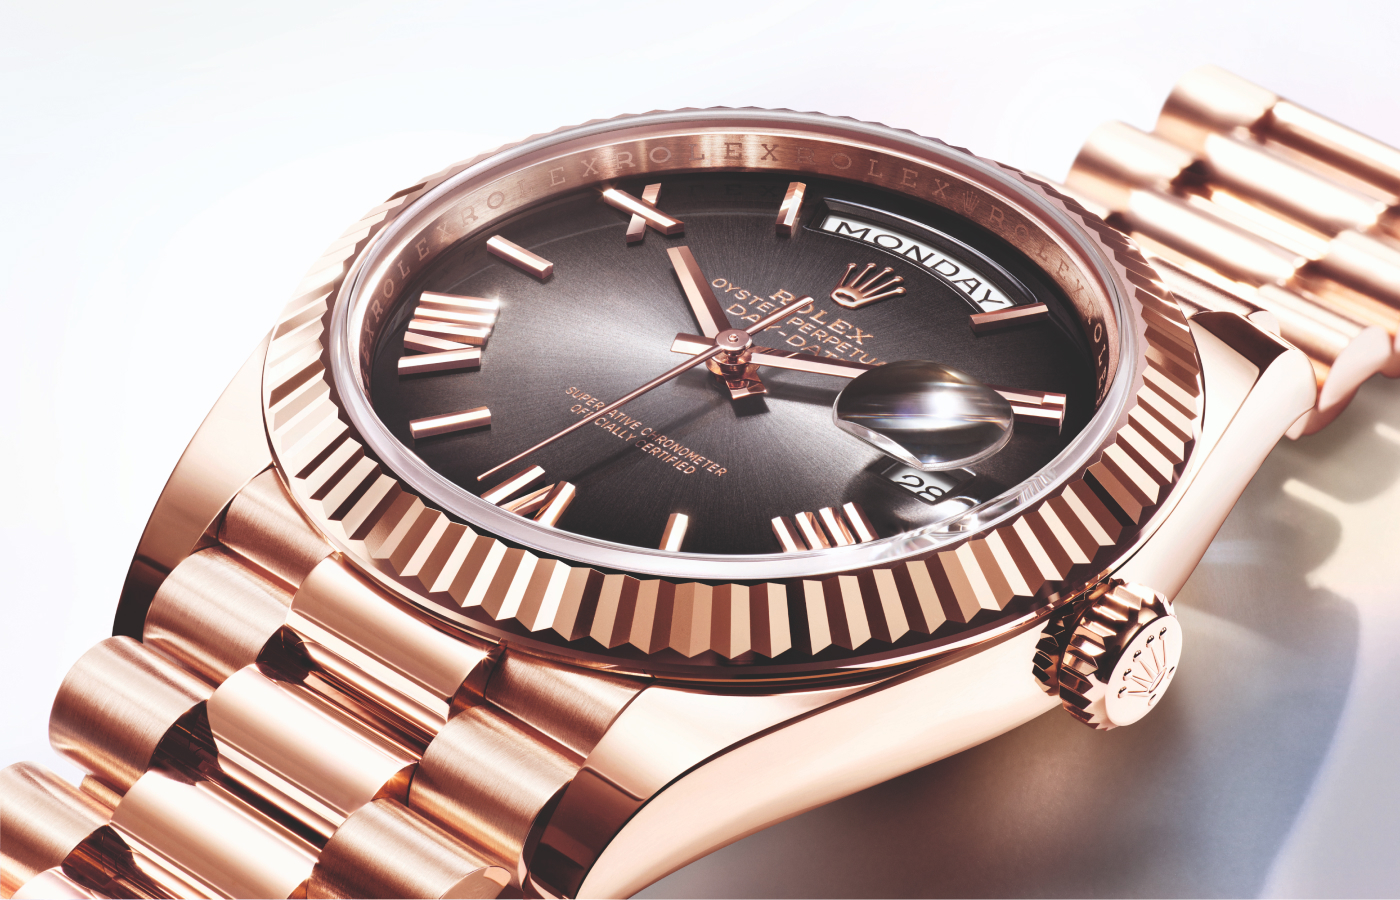 Rolex Oyster Perpetual Day-Date in pink gold, Everose gold with a black slate ombré, gloss, sunray finish dial